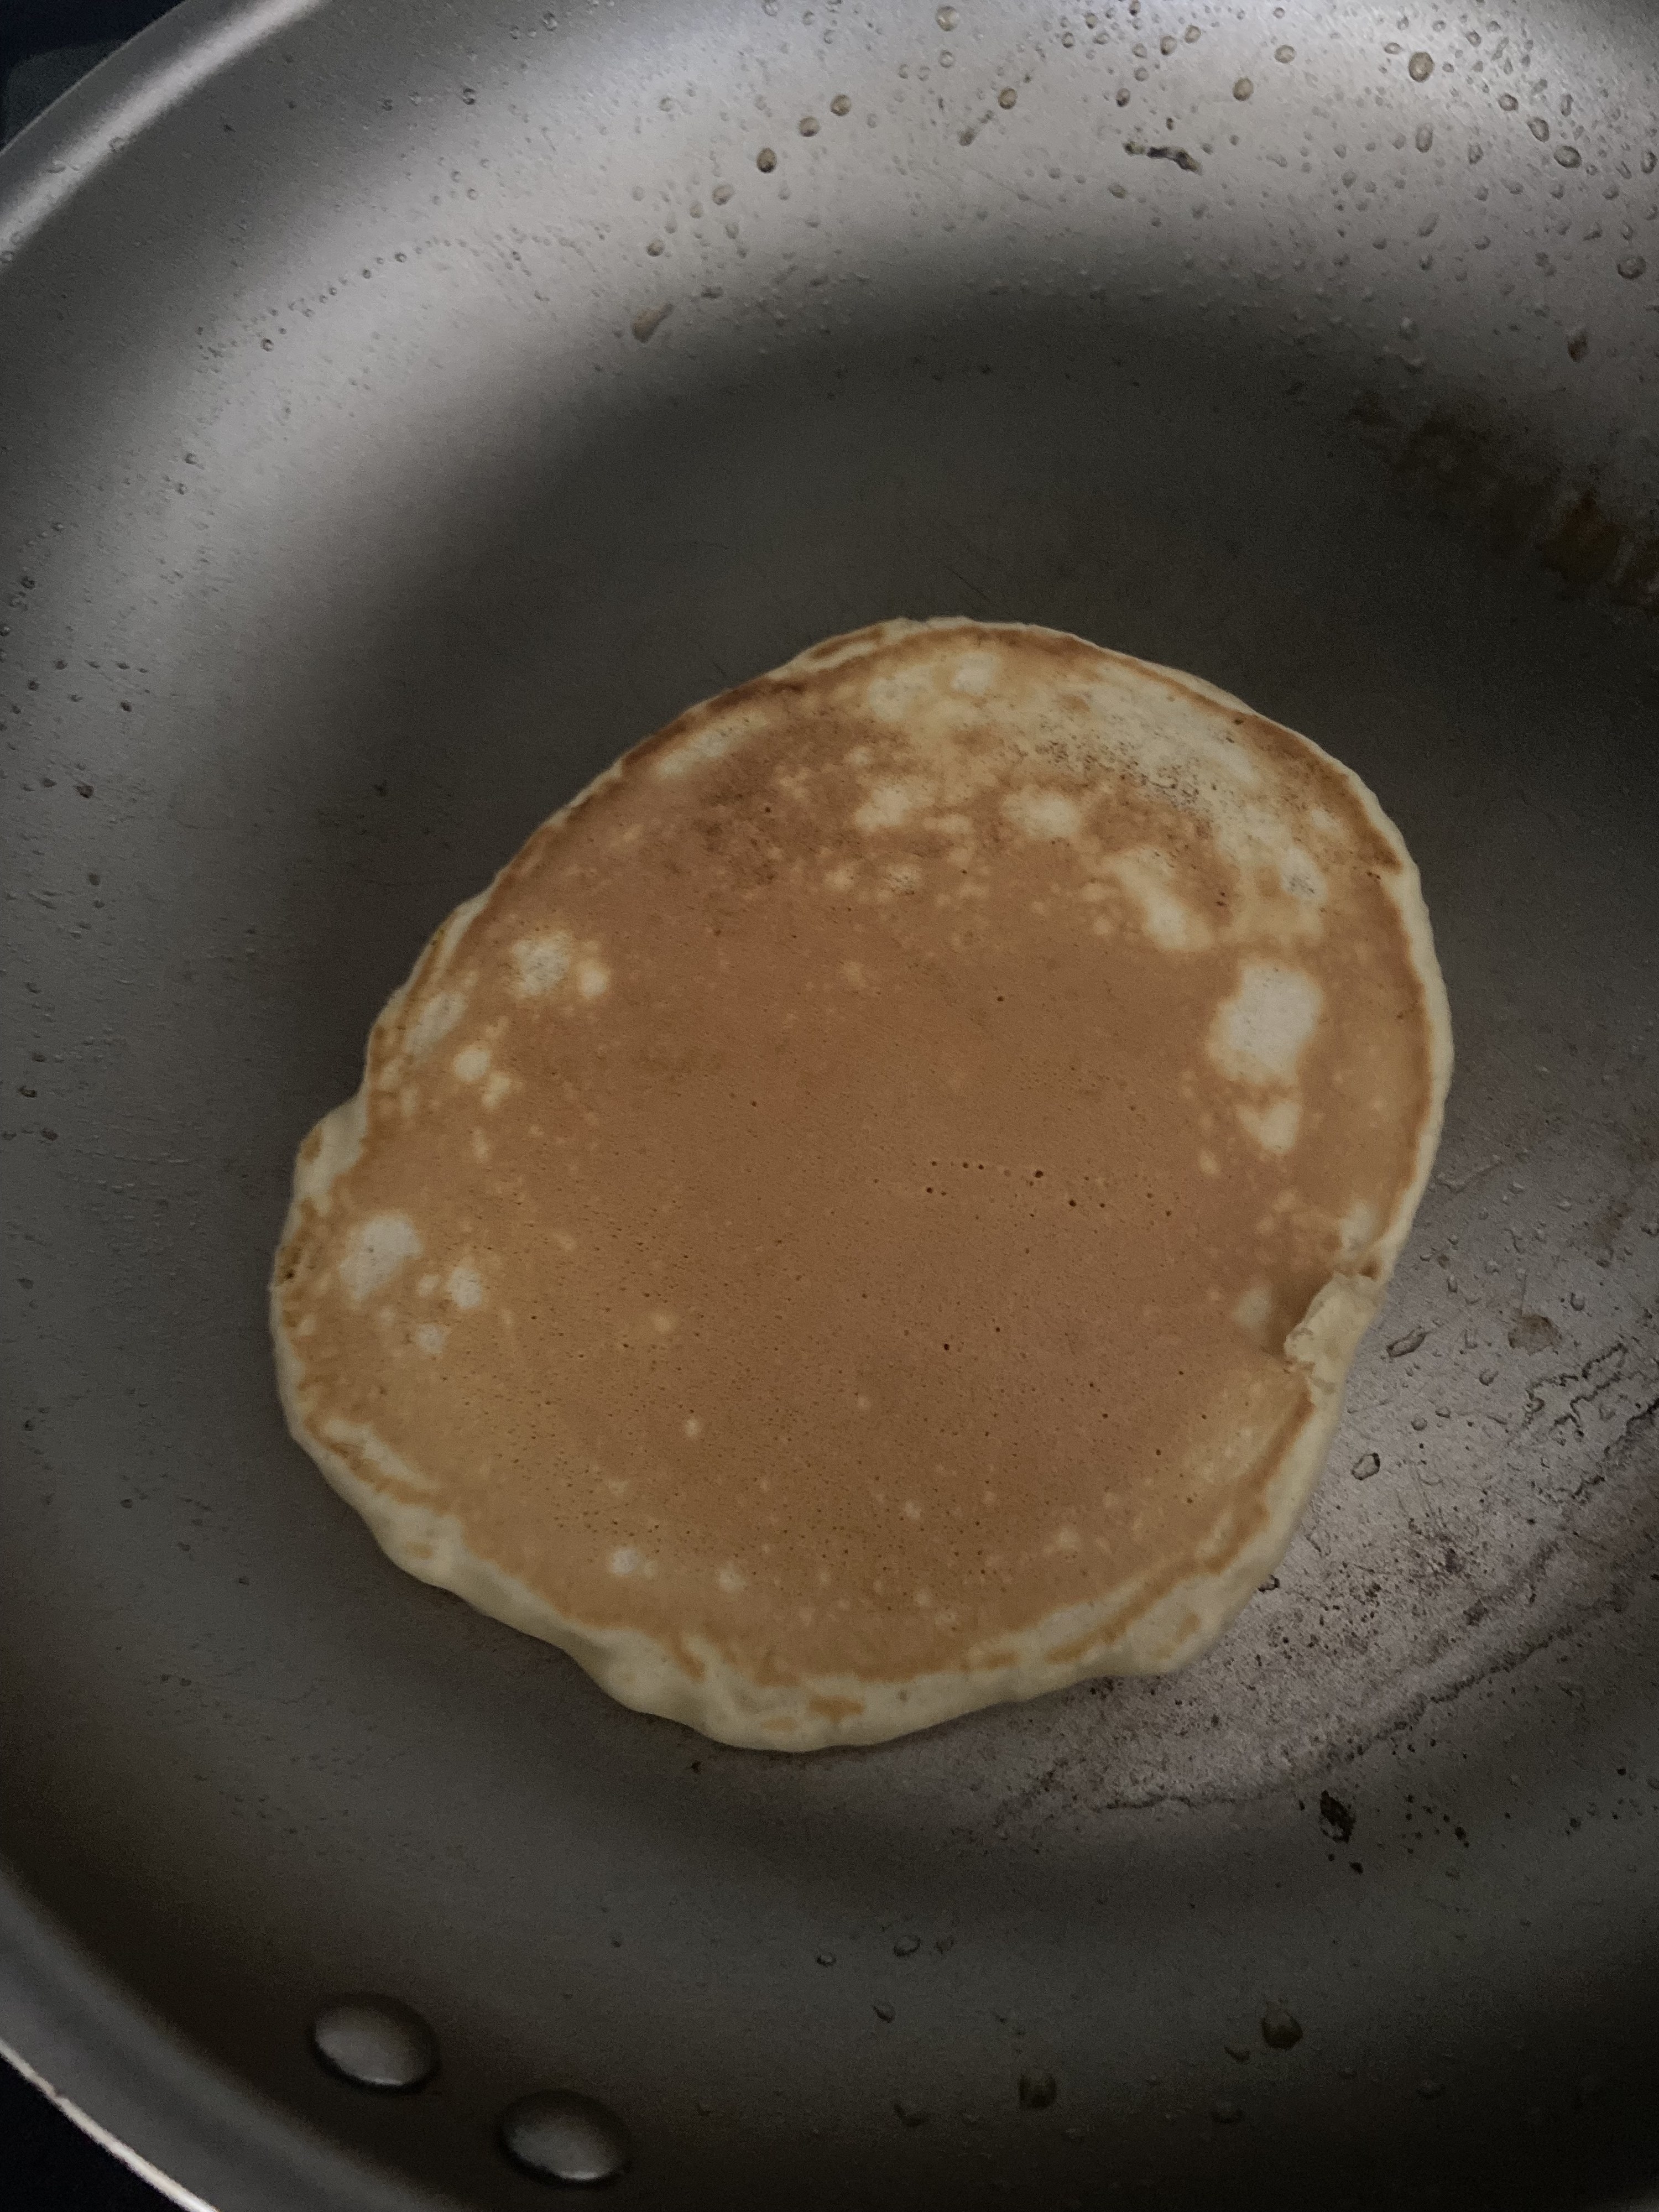 The third pancake is nearly a perfect oval and has the most consistent coloring